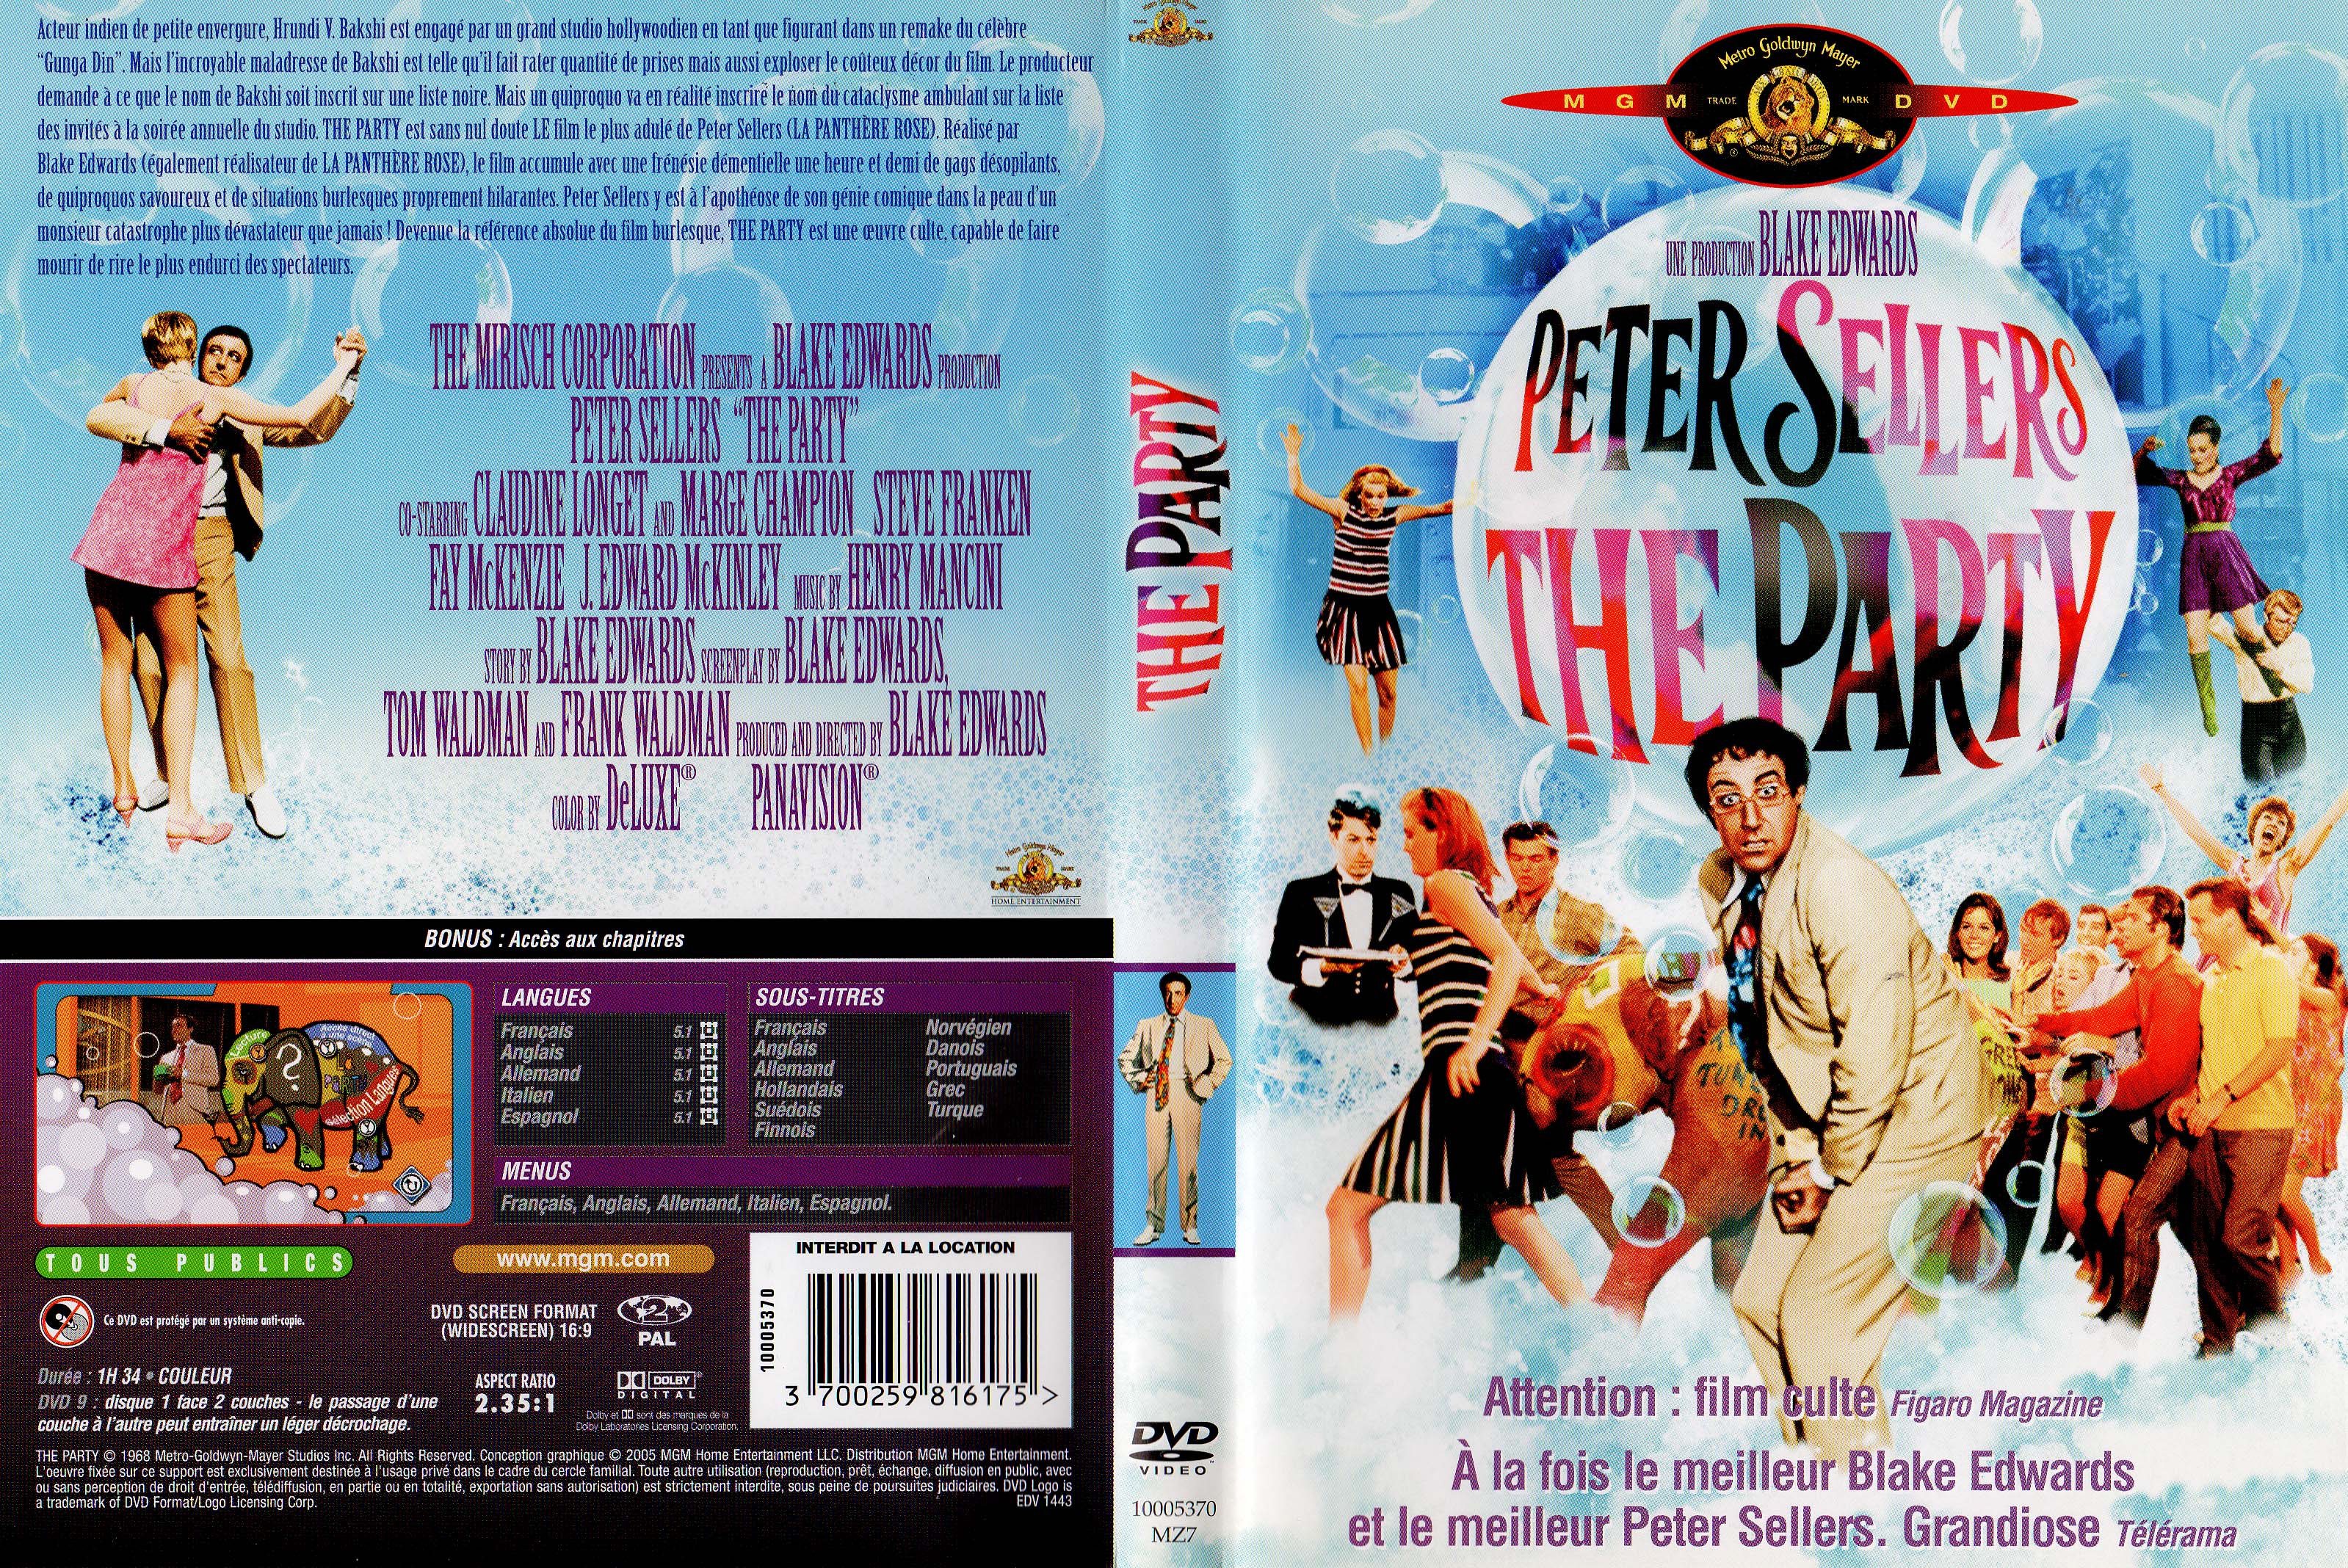 Jaquette DVD The party v2